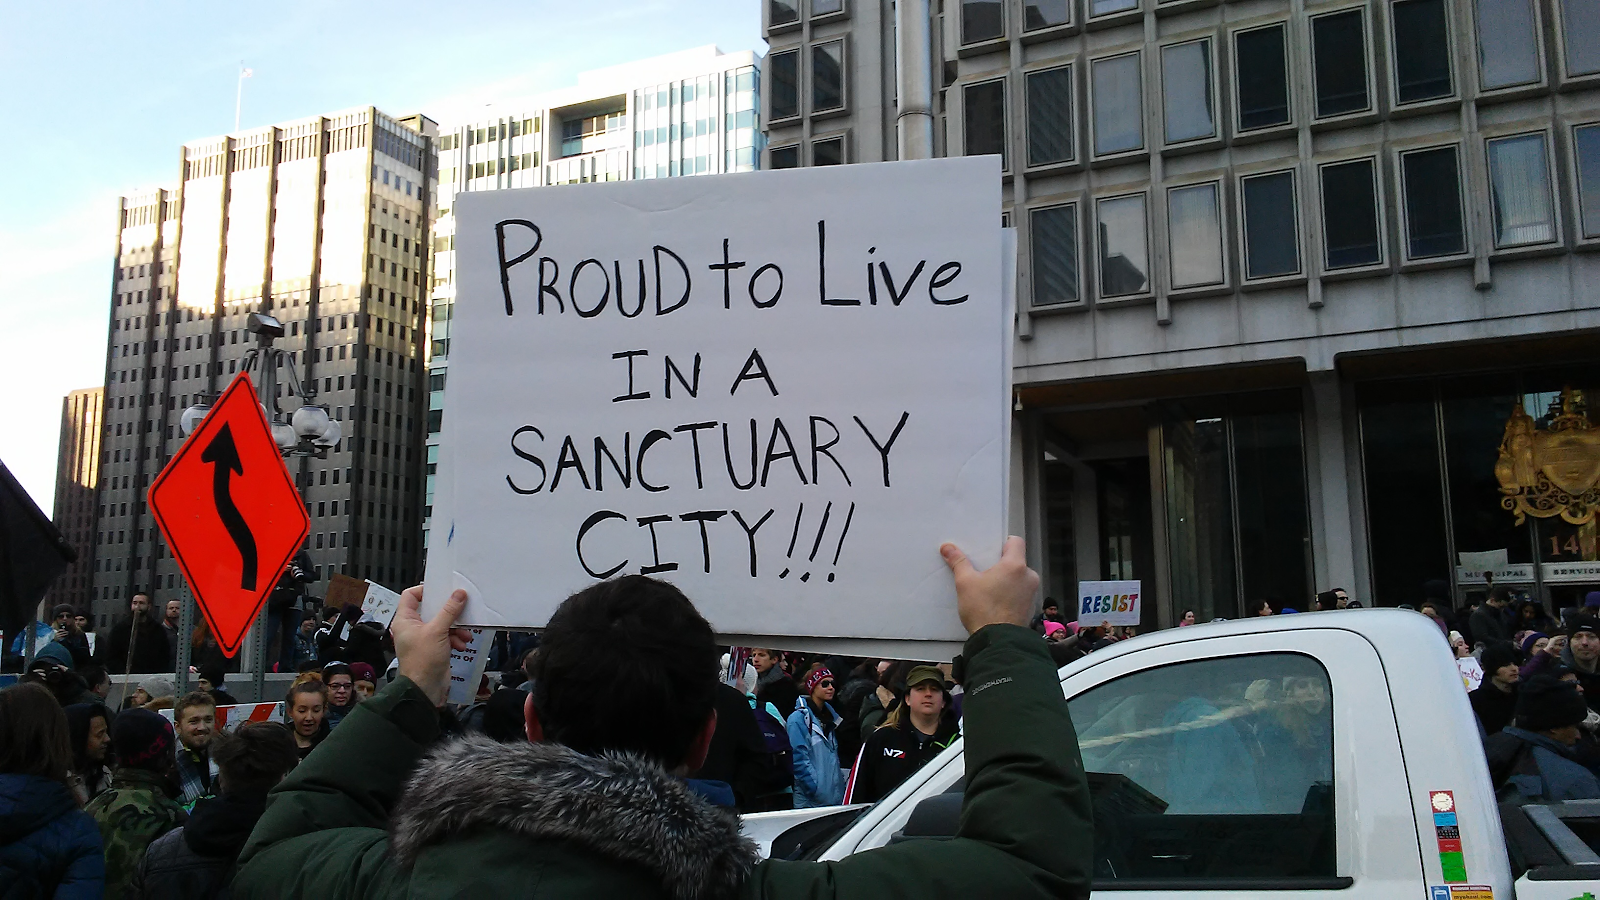 What Are Sanctuary Cities?